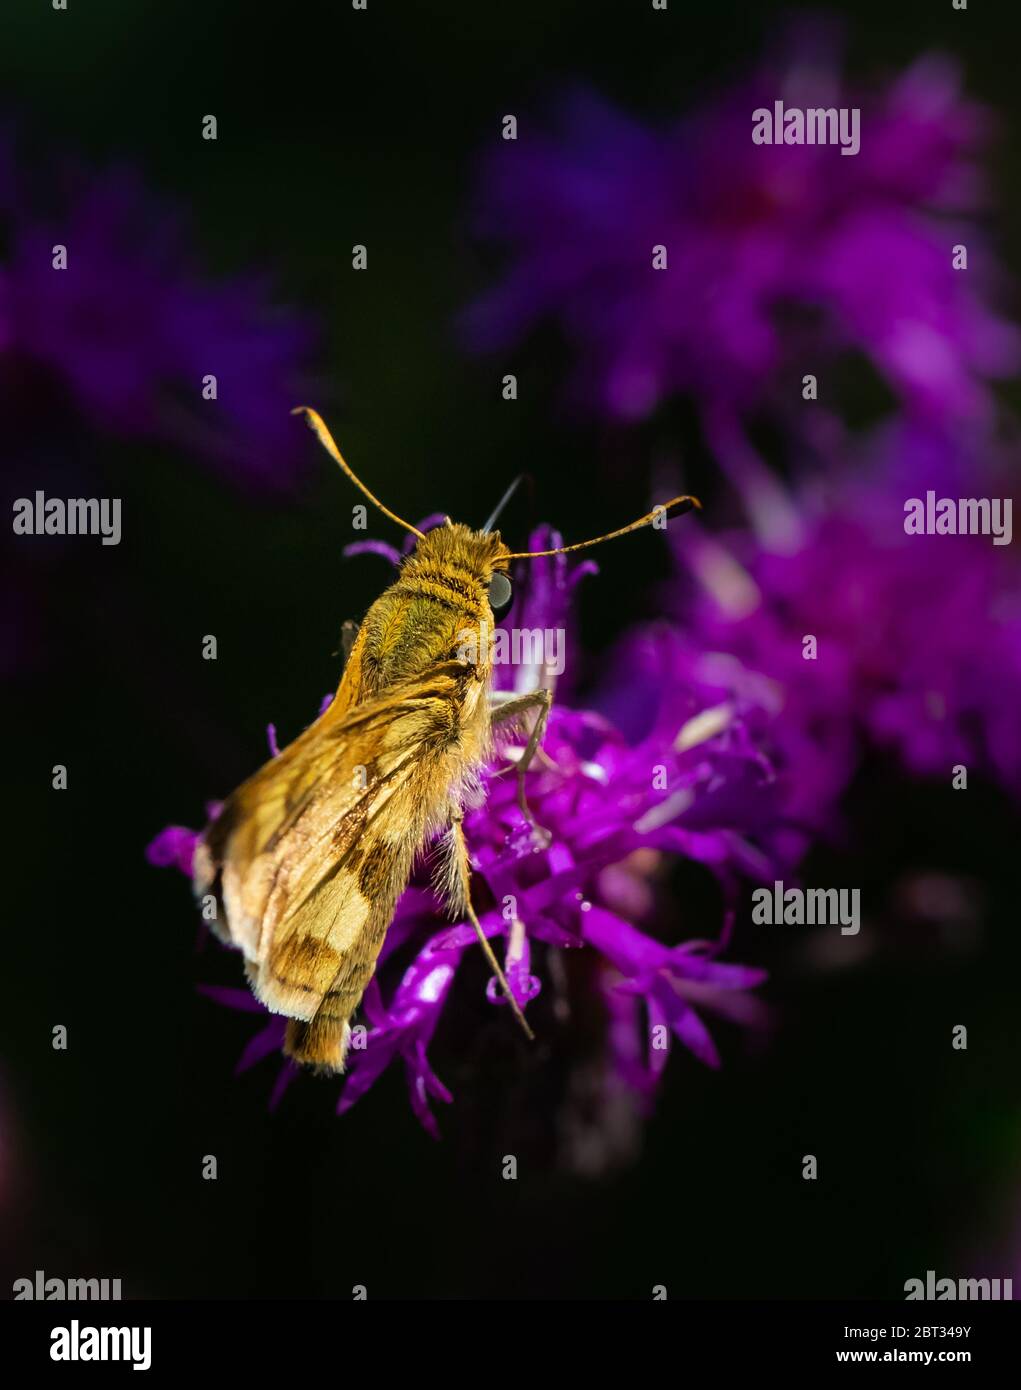 View from above a Fiery Skipper butterfly feeding against a dark blurred background Stock Photo